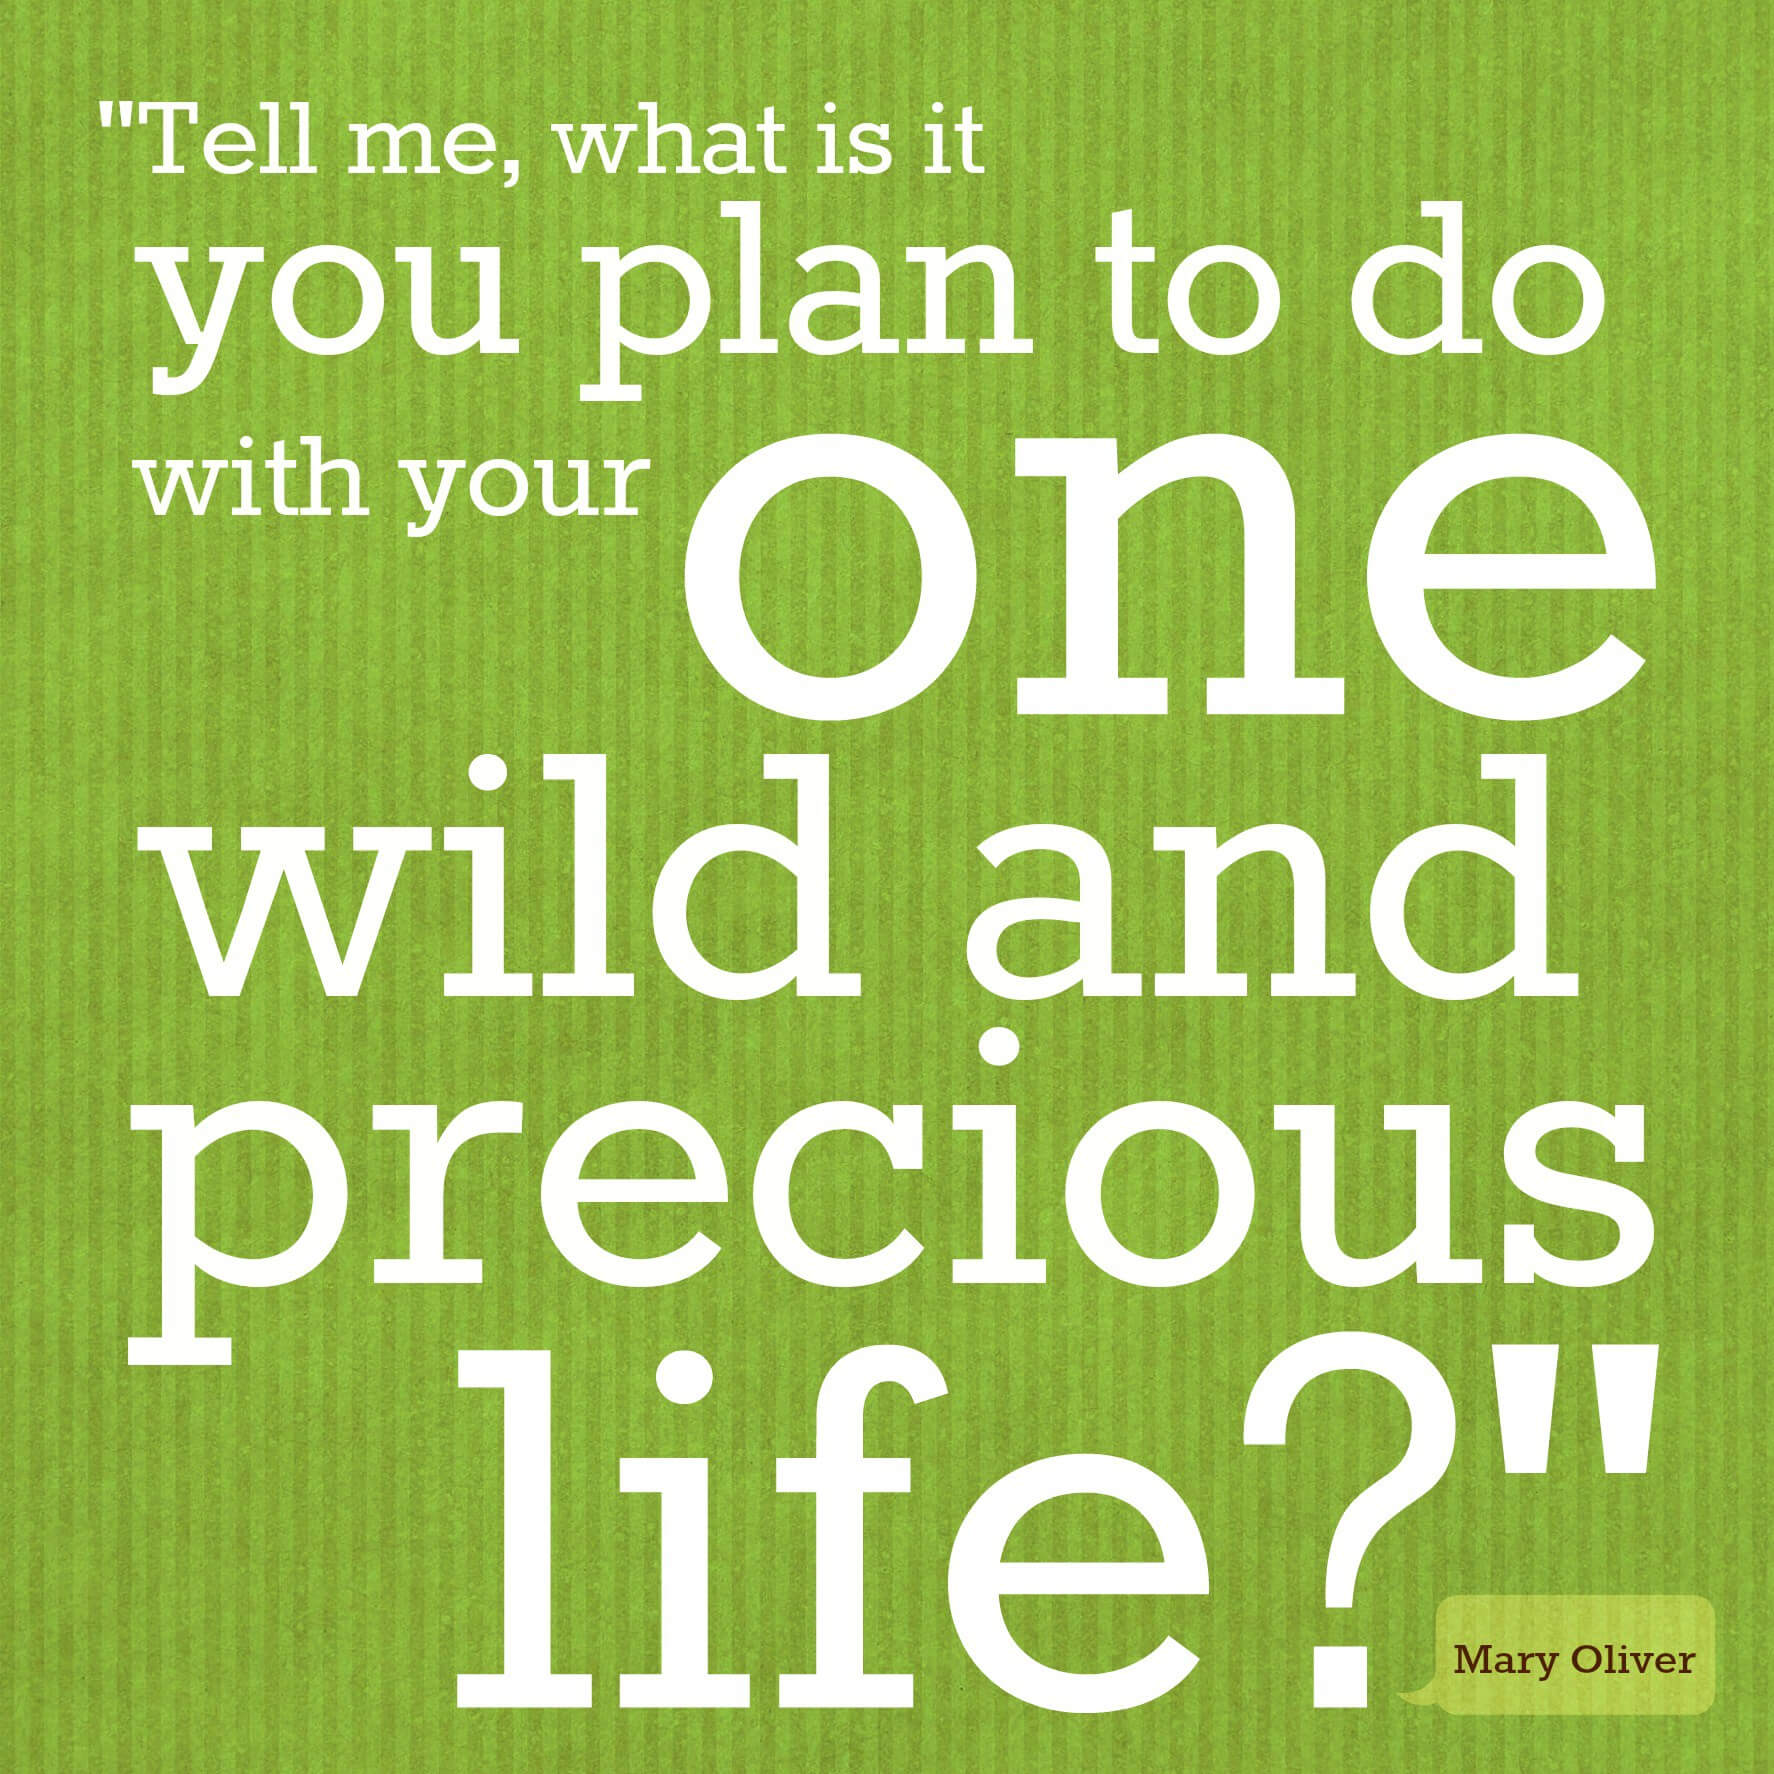 Life is Wild and Precious, Be Present